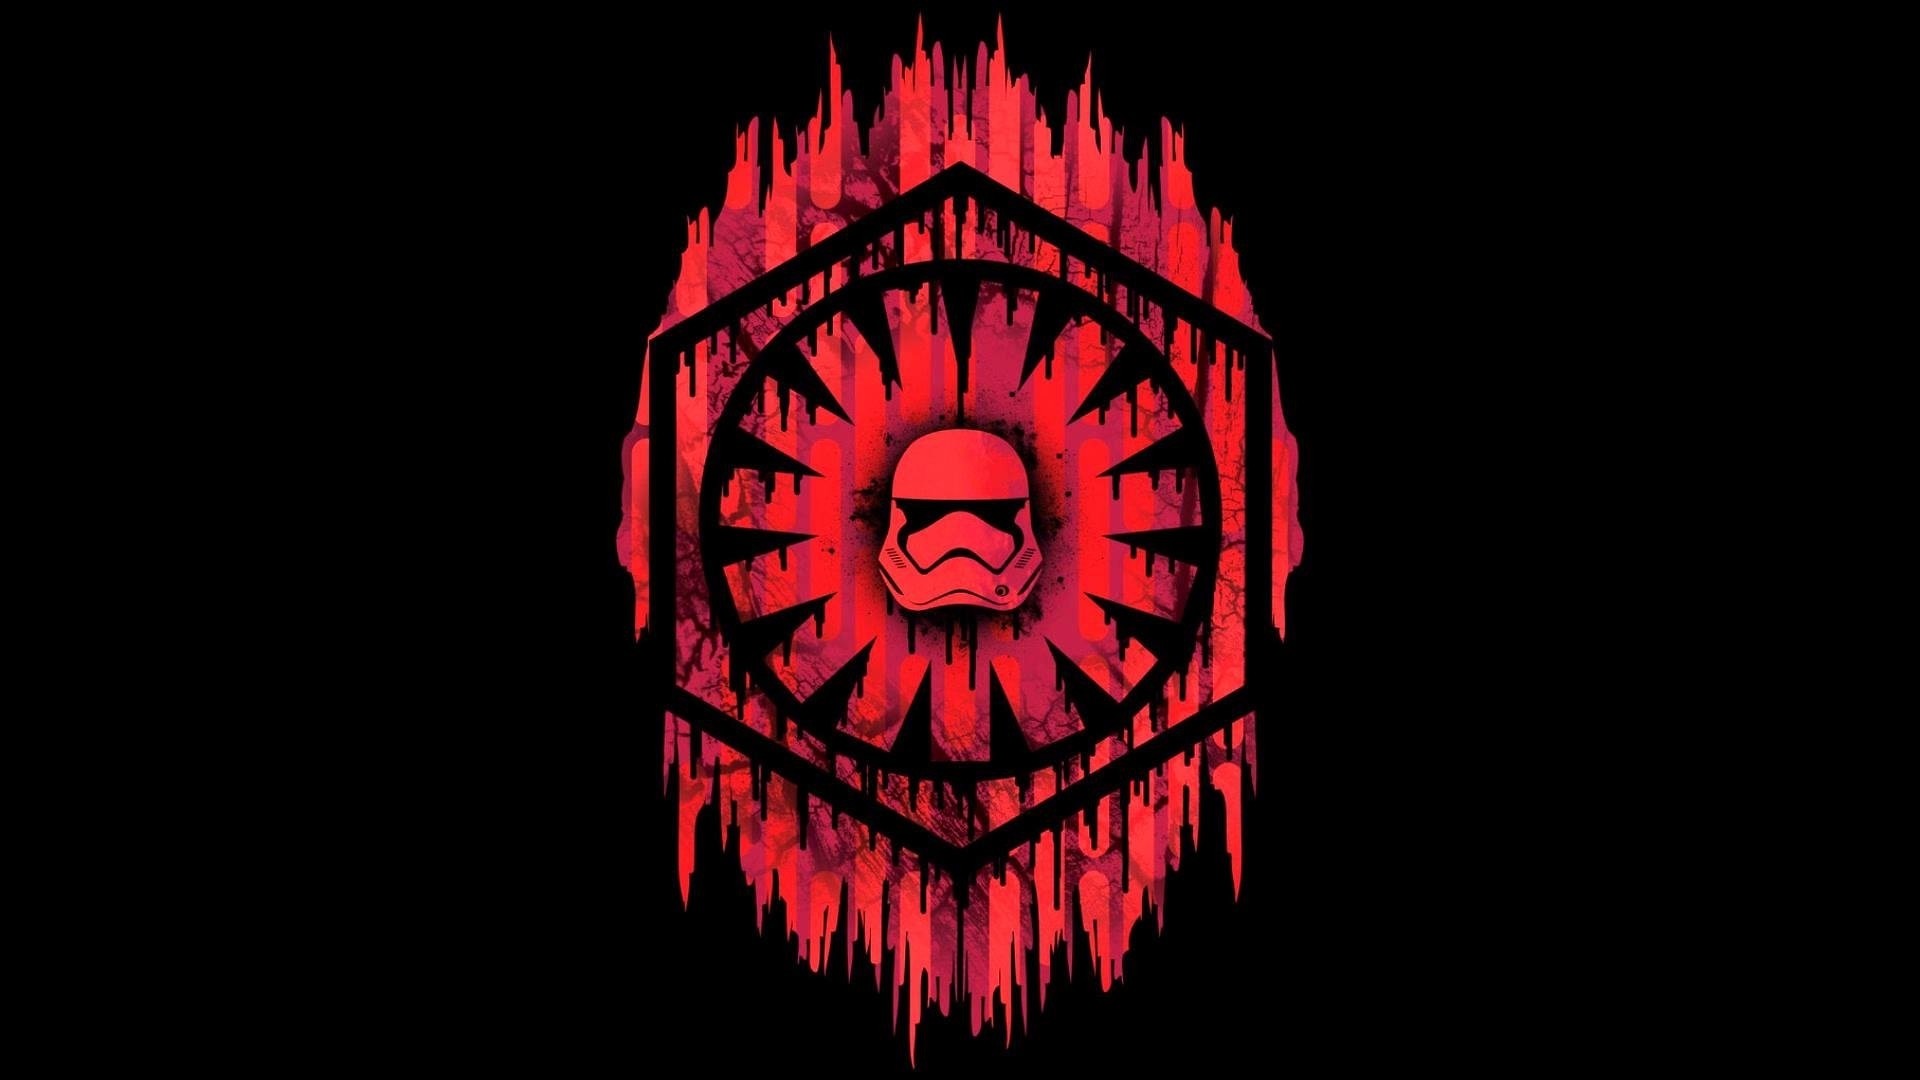 1920x1080 Title : the first order wallpaper 59 – get hd wallpapers free. Dimension :  1920 x 1080. File Type : JPG/JPEG